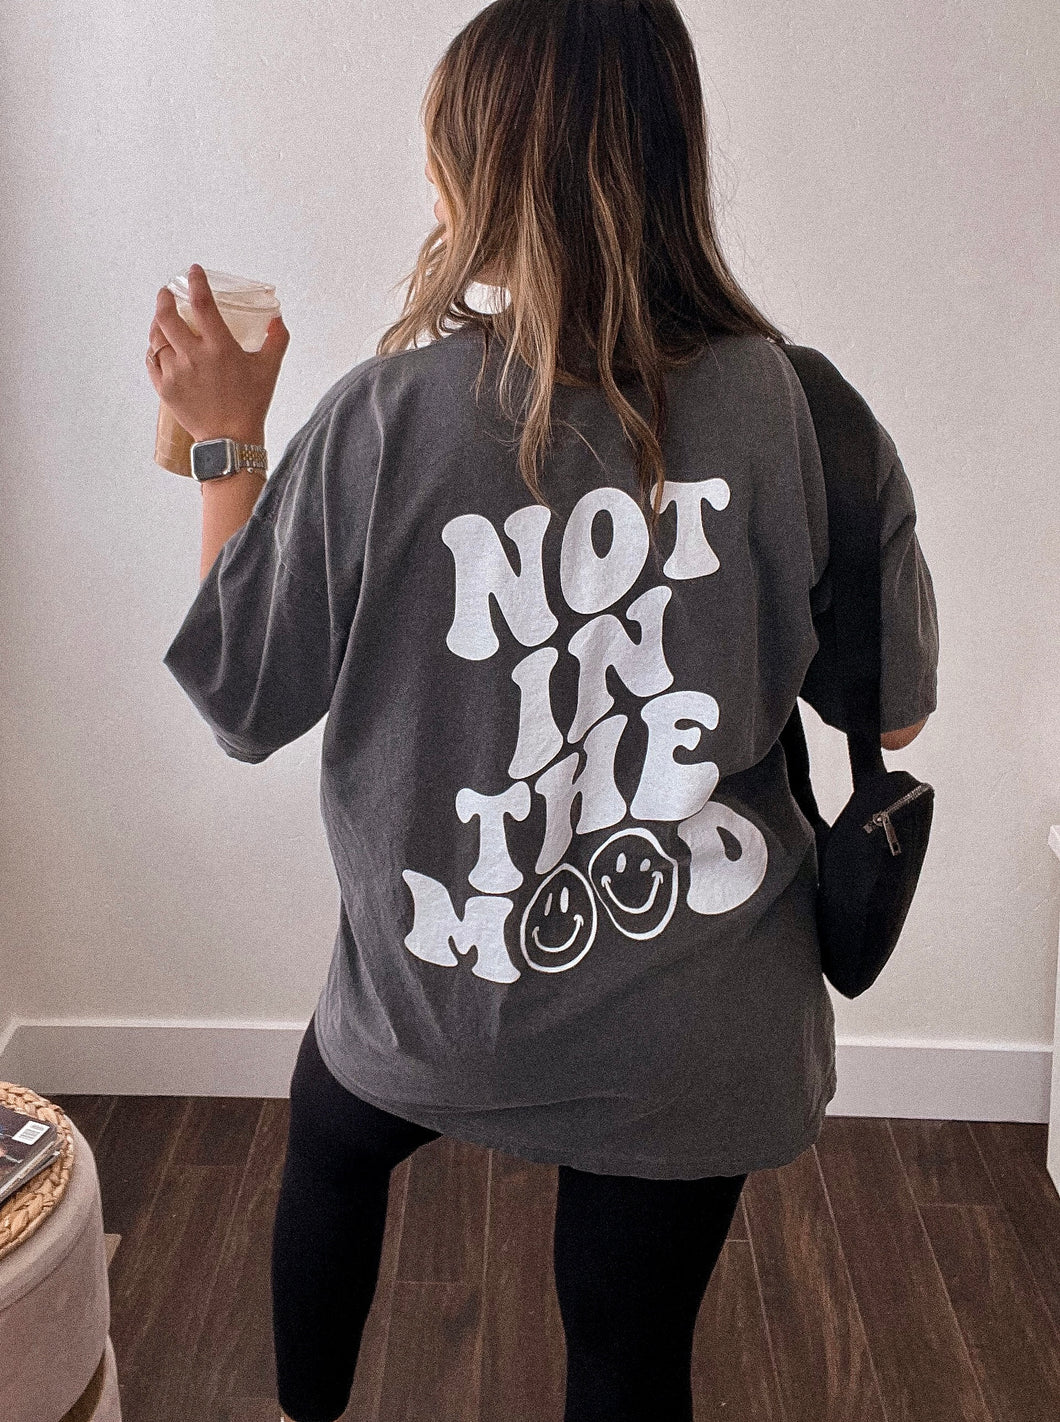 NOT IN THE MOOD oversized graphic tee